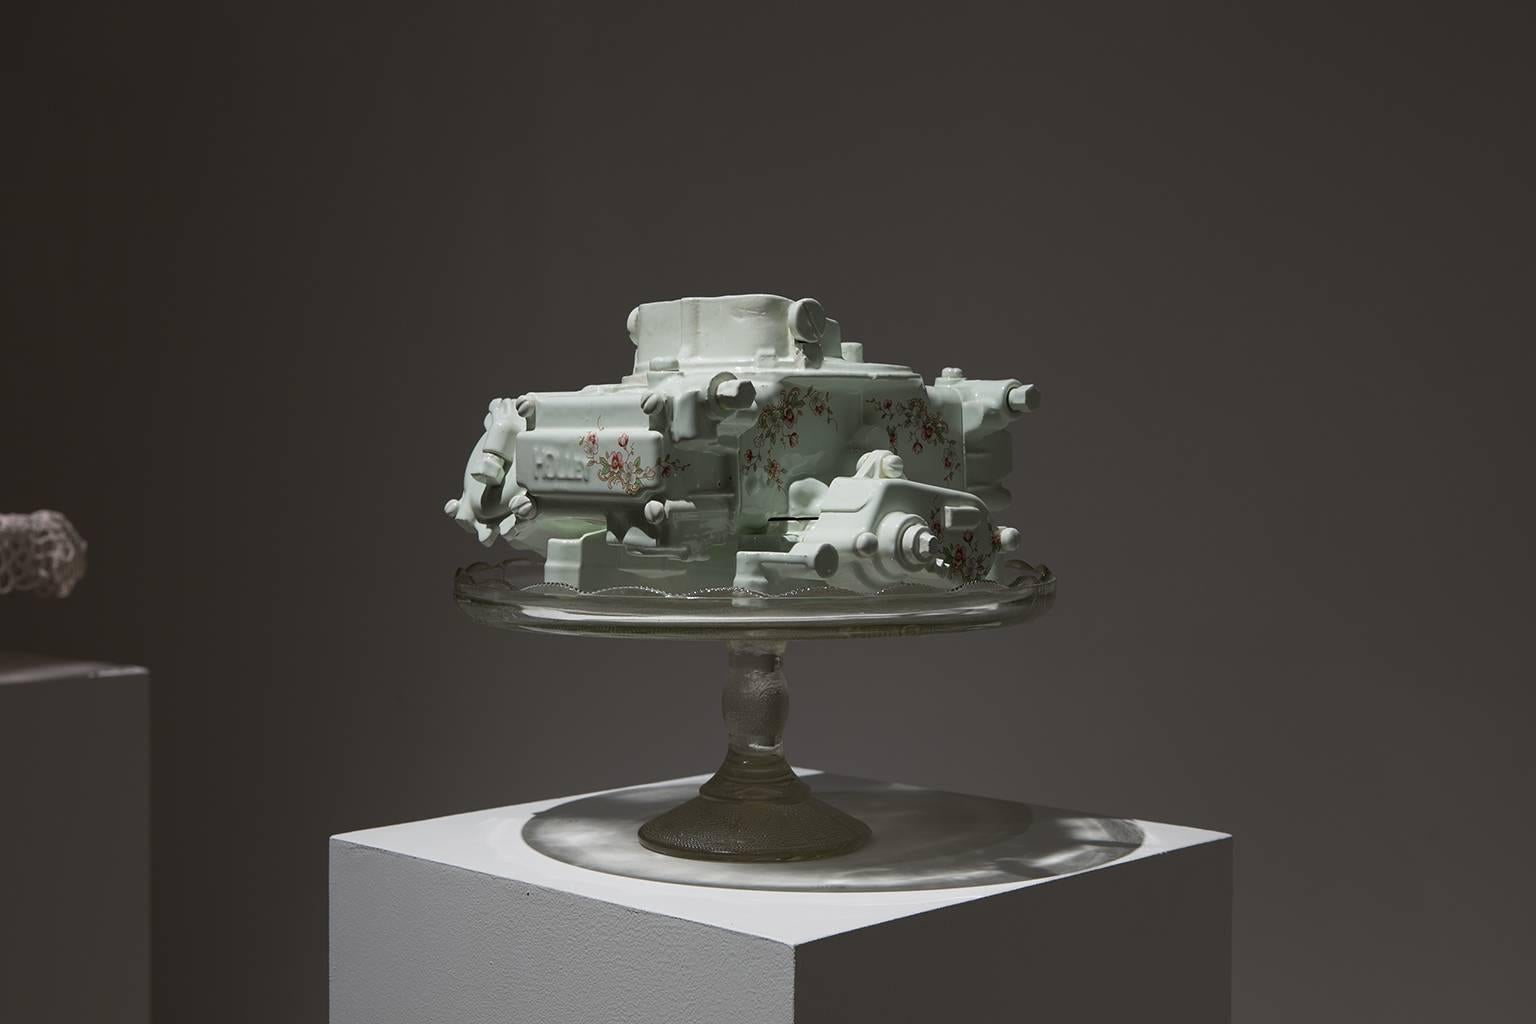 Holly Carburettor - Sculpture by Clint Neufeld